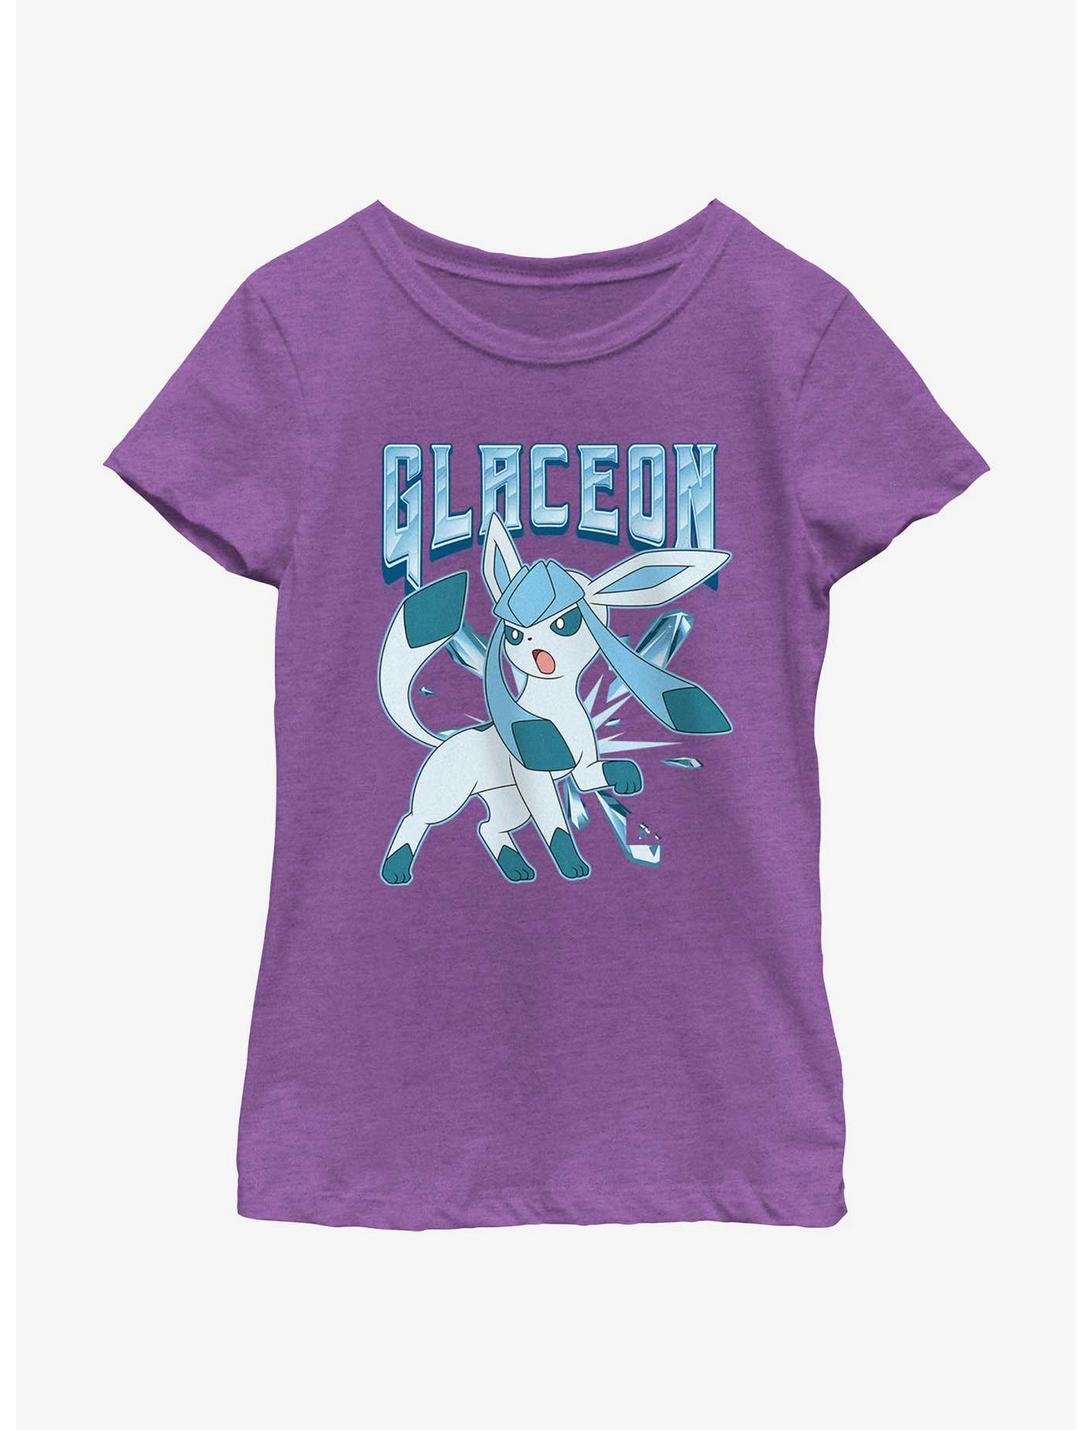 Pokemon Glaceon Ice Beam Youth Girls T-Shirt, PURPLE BERRY, hi-res